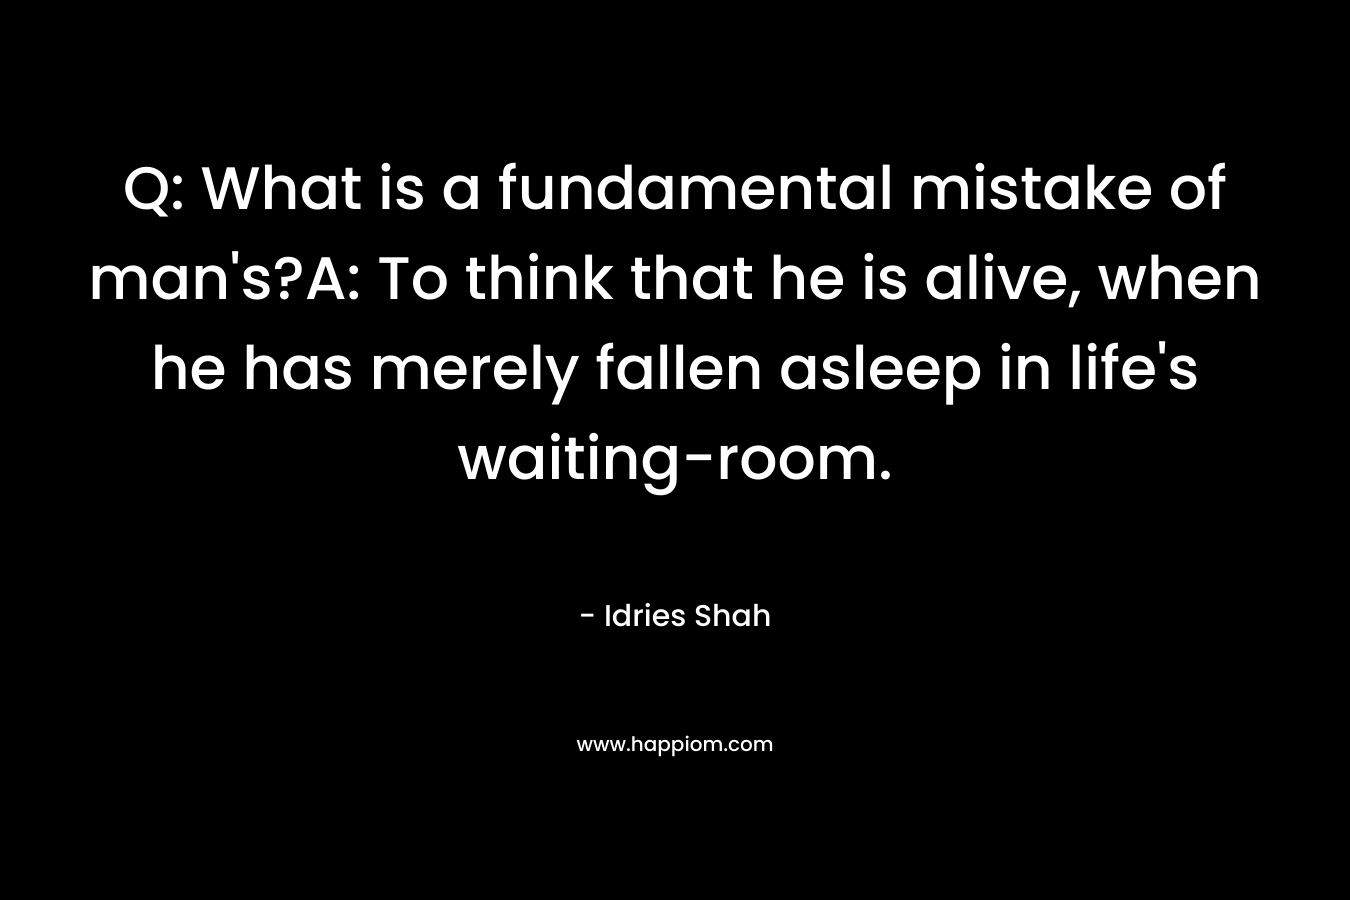 Q: What is a fundamental mistake of man’s?A: To think that he is alive, when he has merely fallen asleep in life’s waiting-room. – Idries Shah